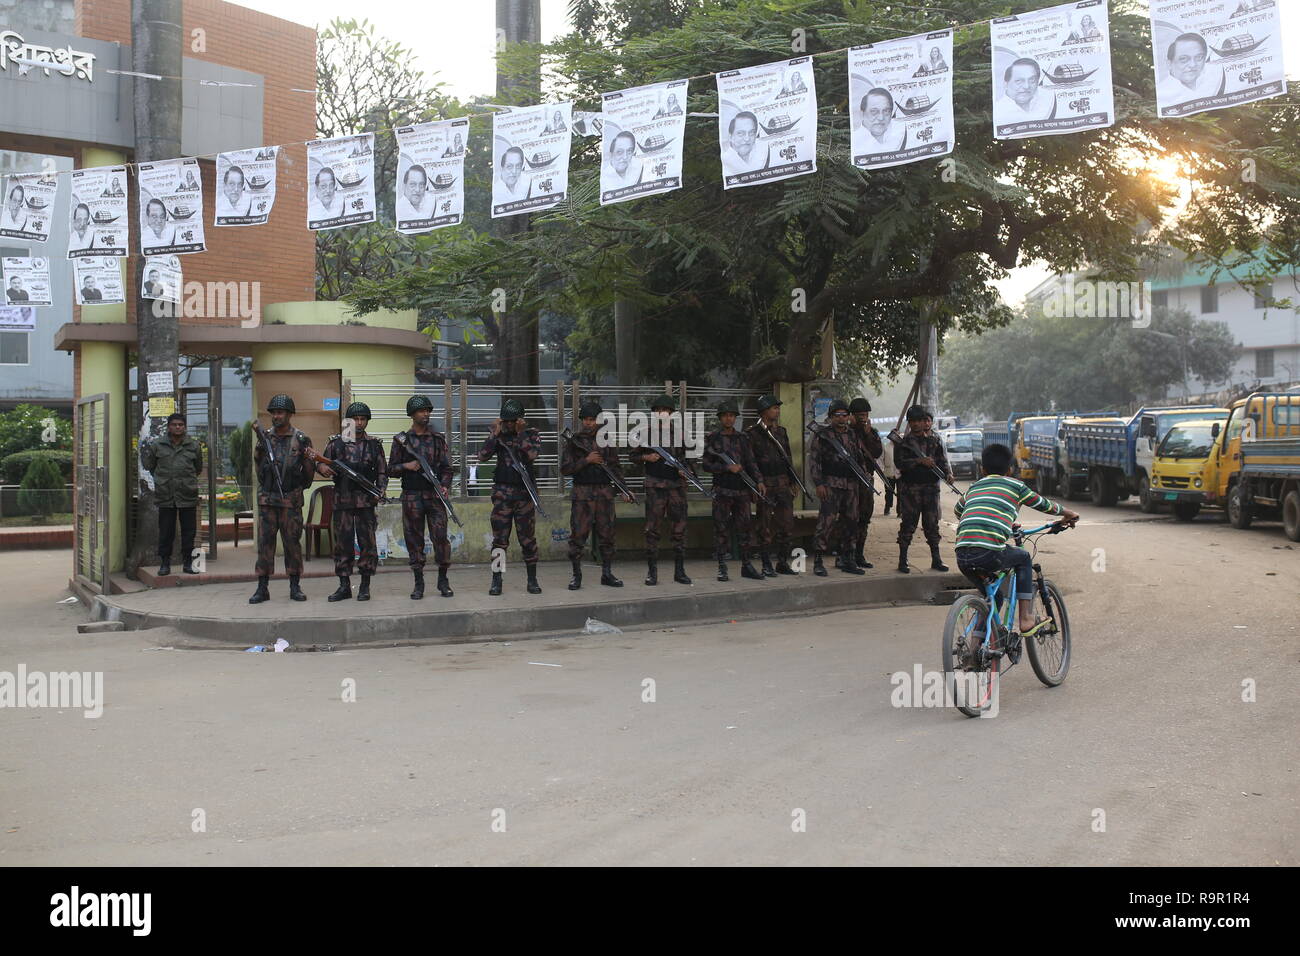 Dhaka, Bangladesh: Members of Border Guard Bangladesh (BGB) stand guard on a street ahead of the general election in Dhaka, Bangladesh on December 26, 2018. More than 100 million people are expected to cast their votes in the upcoming general election which will be held on December 30, 2018. © Rehman Asad / Alamy Stock Photo Stock Photo